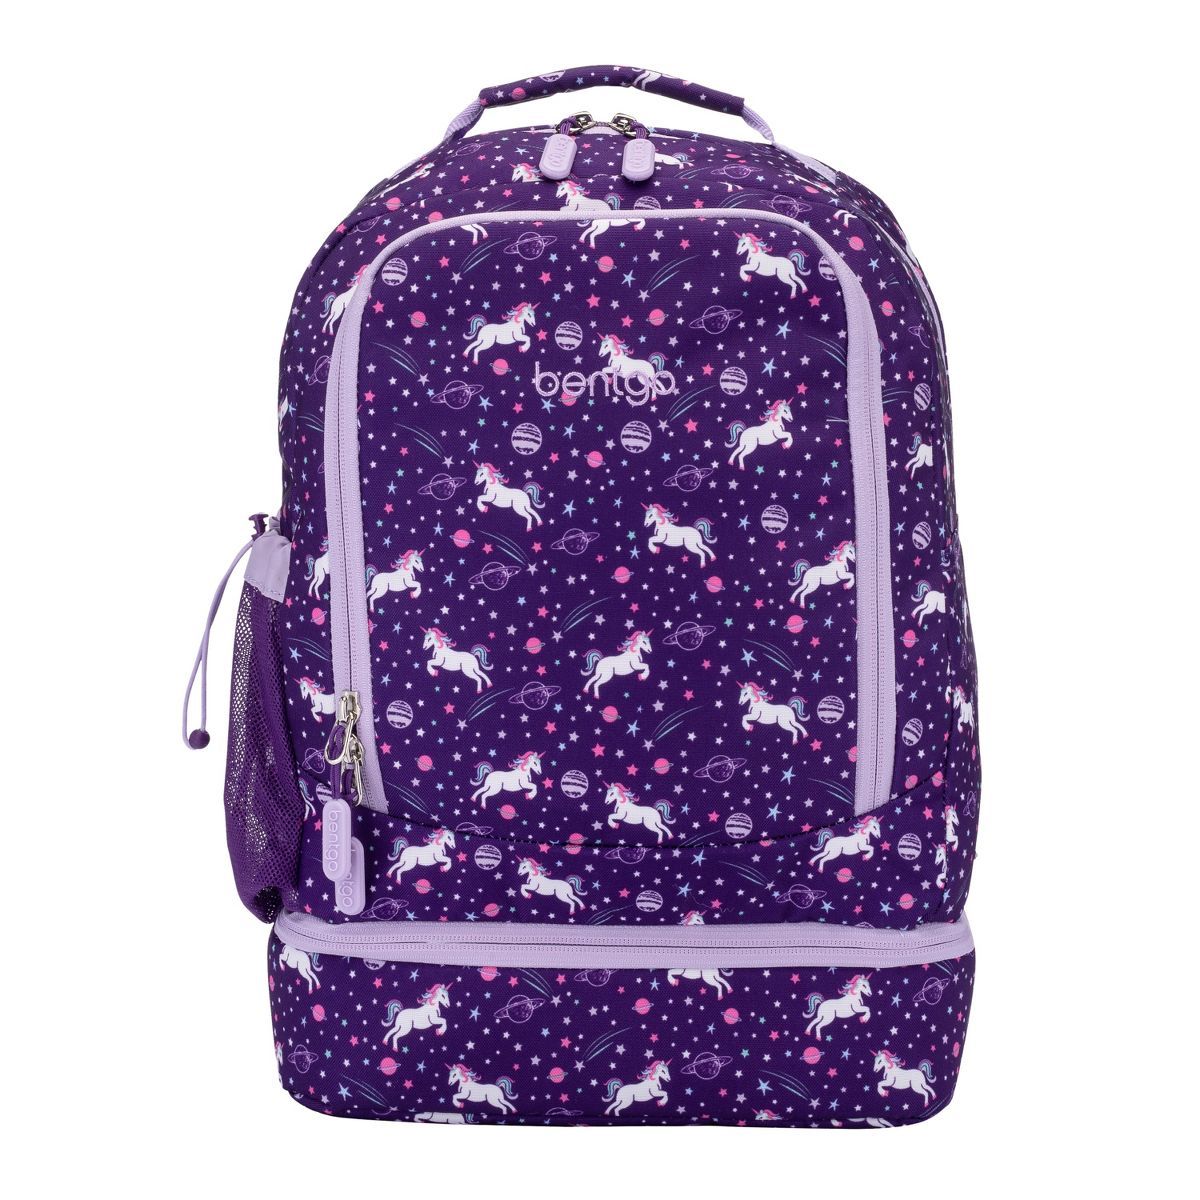 Bentgo Kids' 2-in-1 17" Backpack & Insulated Lunch Bag | Target